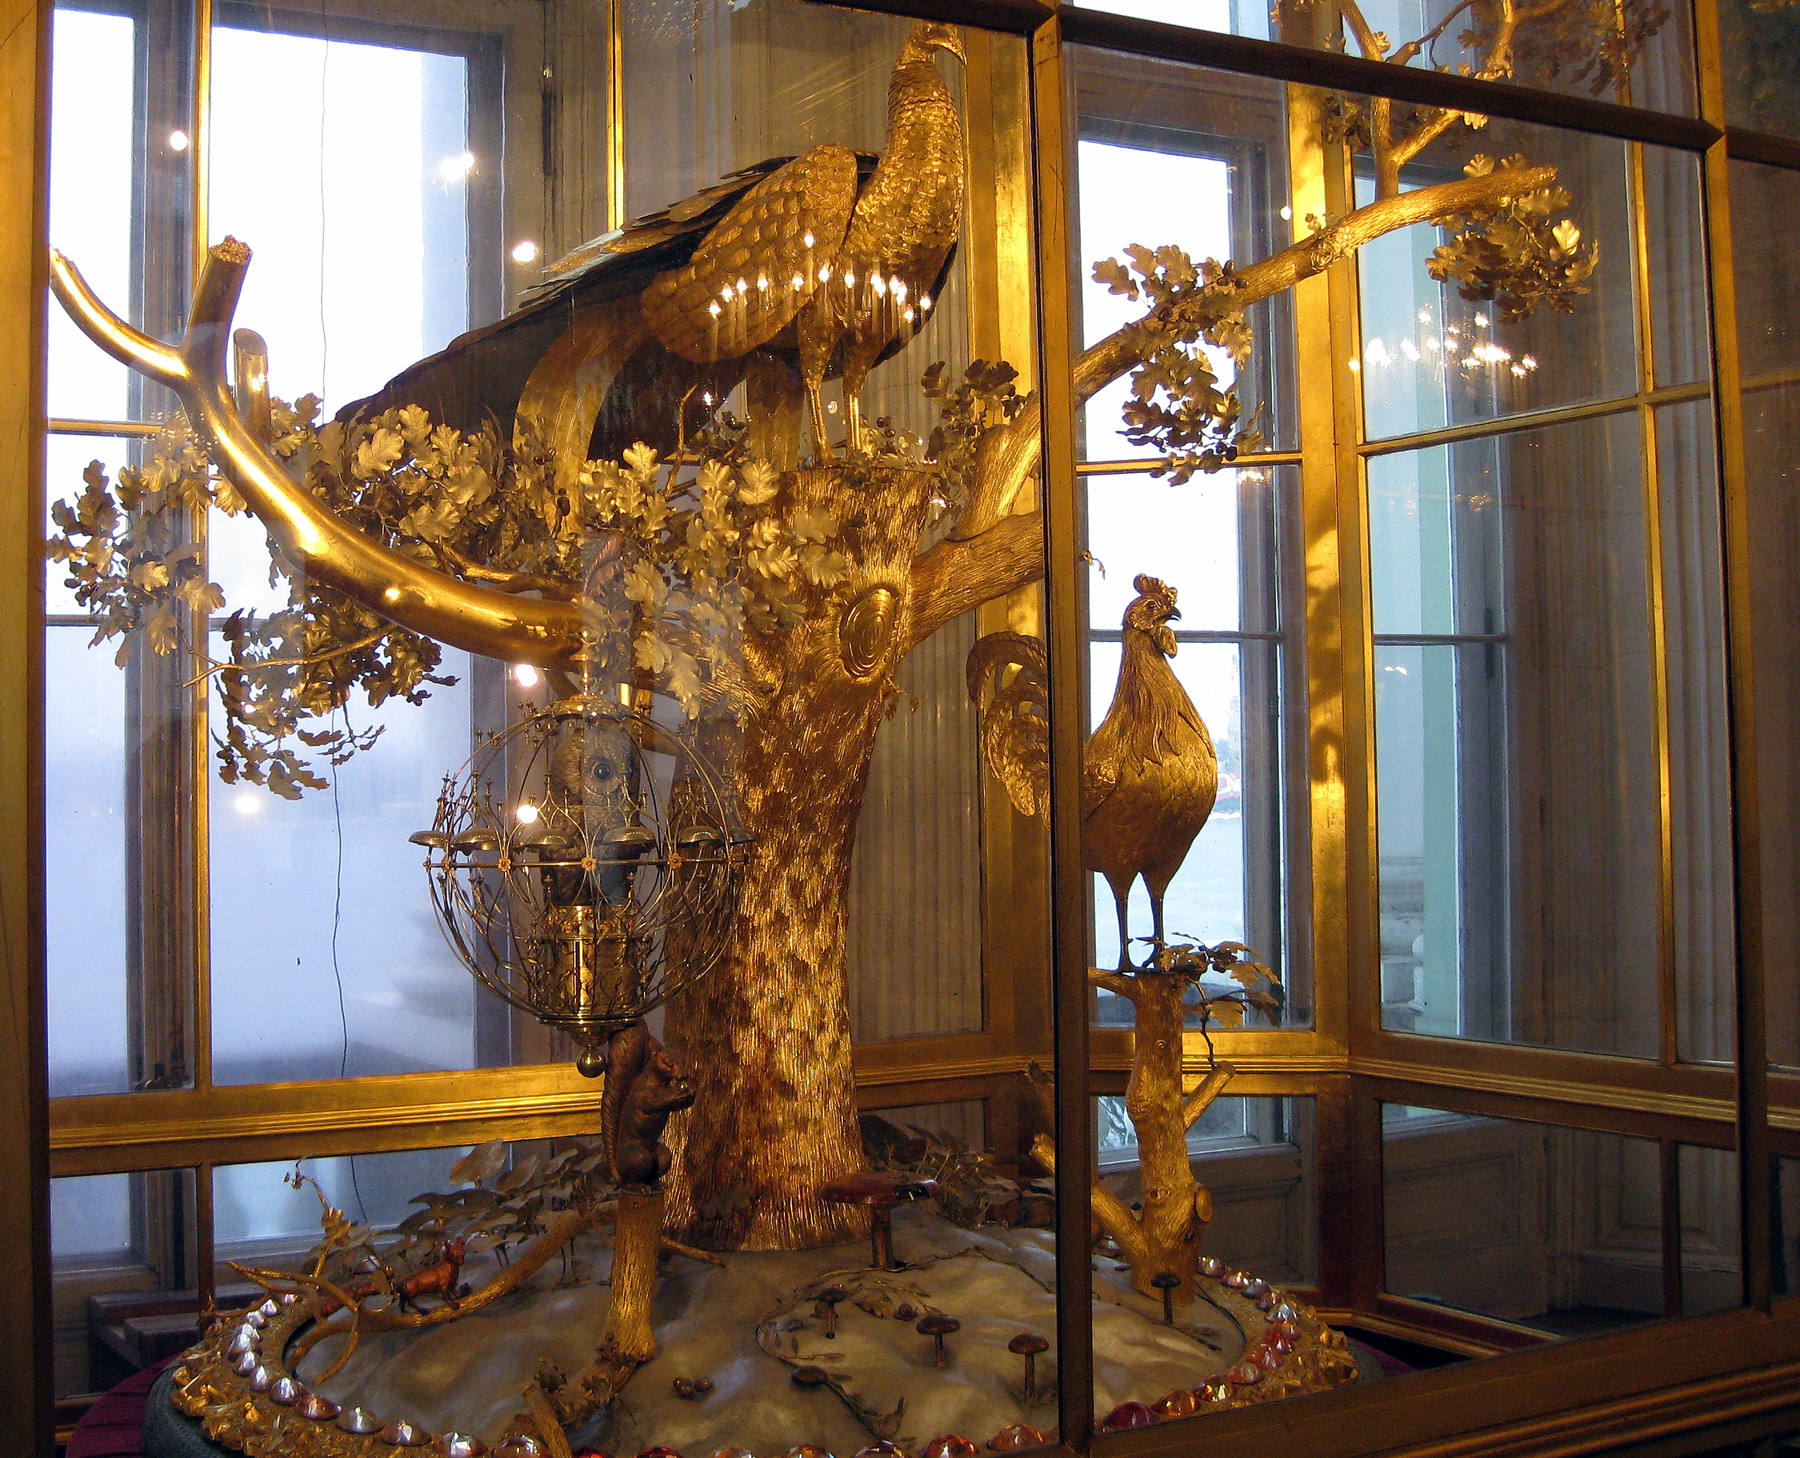 Peacock Clock from Hermitage Museum. It's a large automaton made for Catherine the Great in 1781